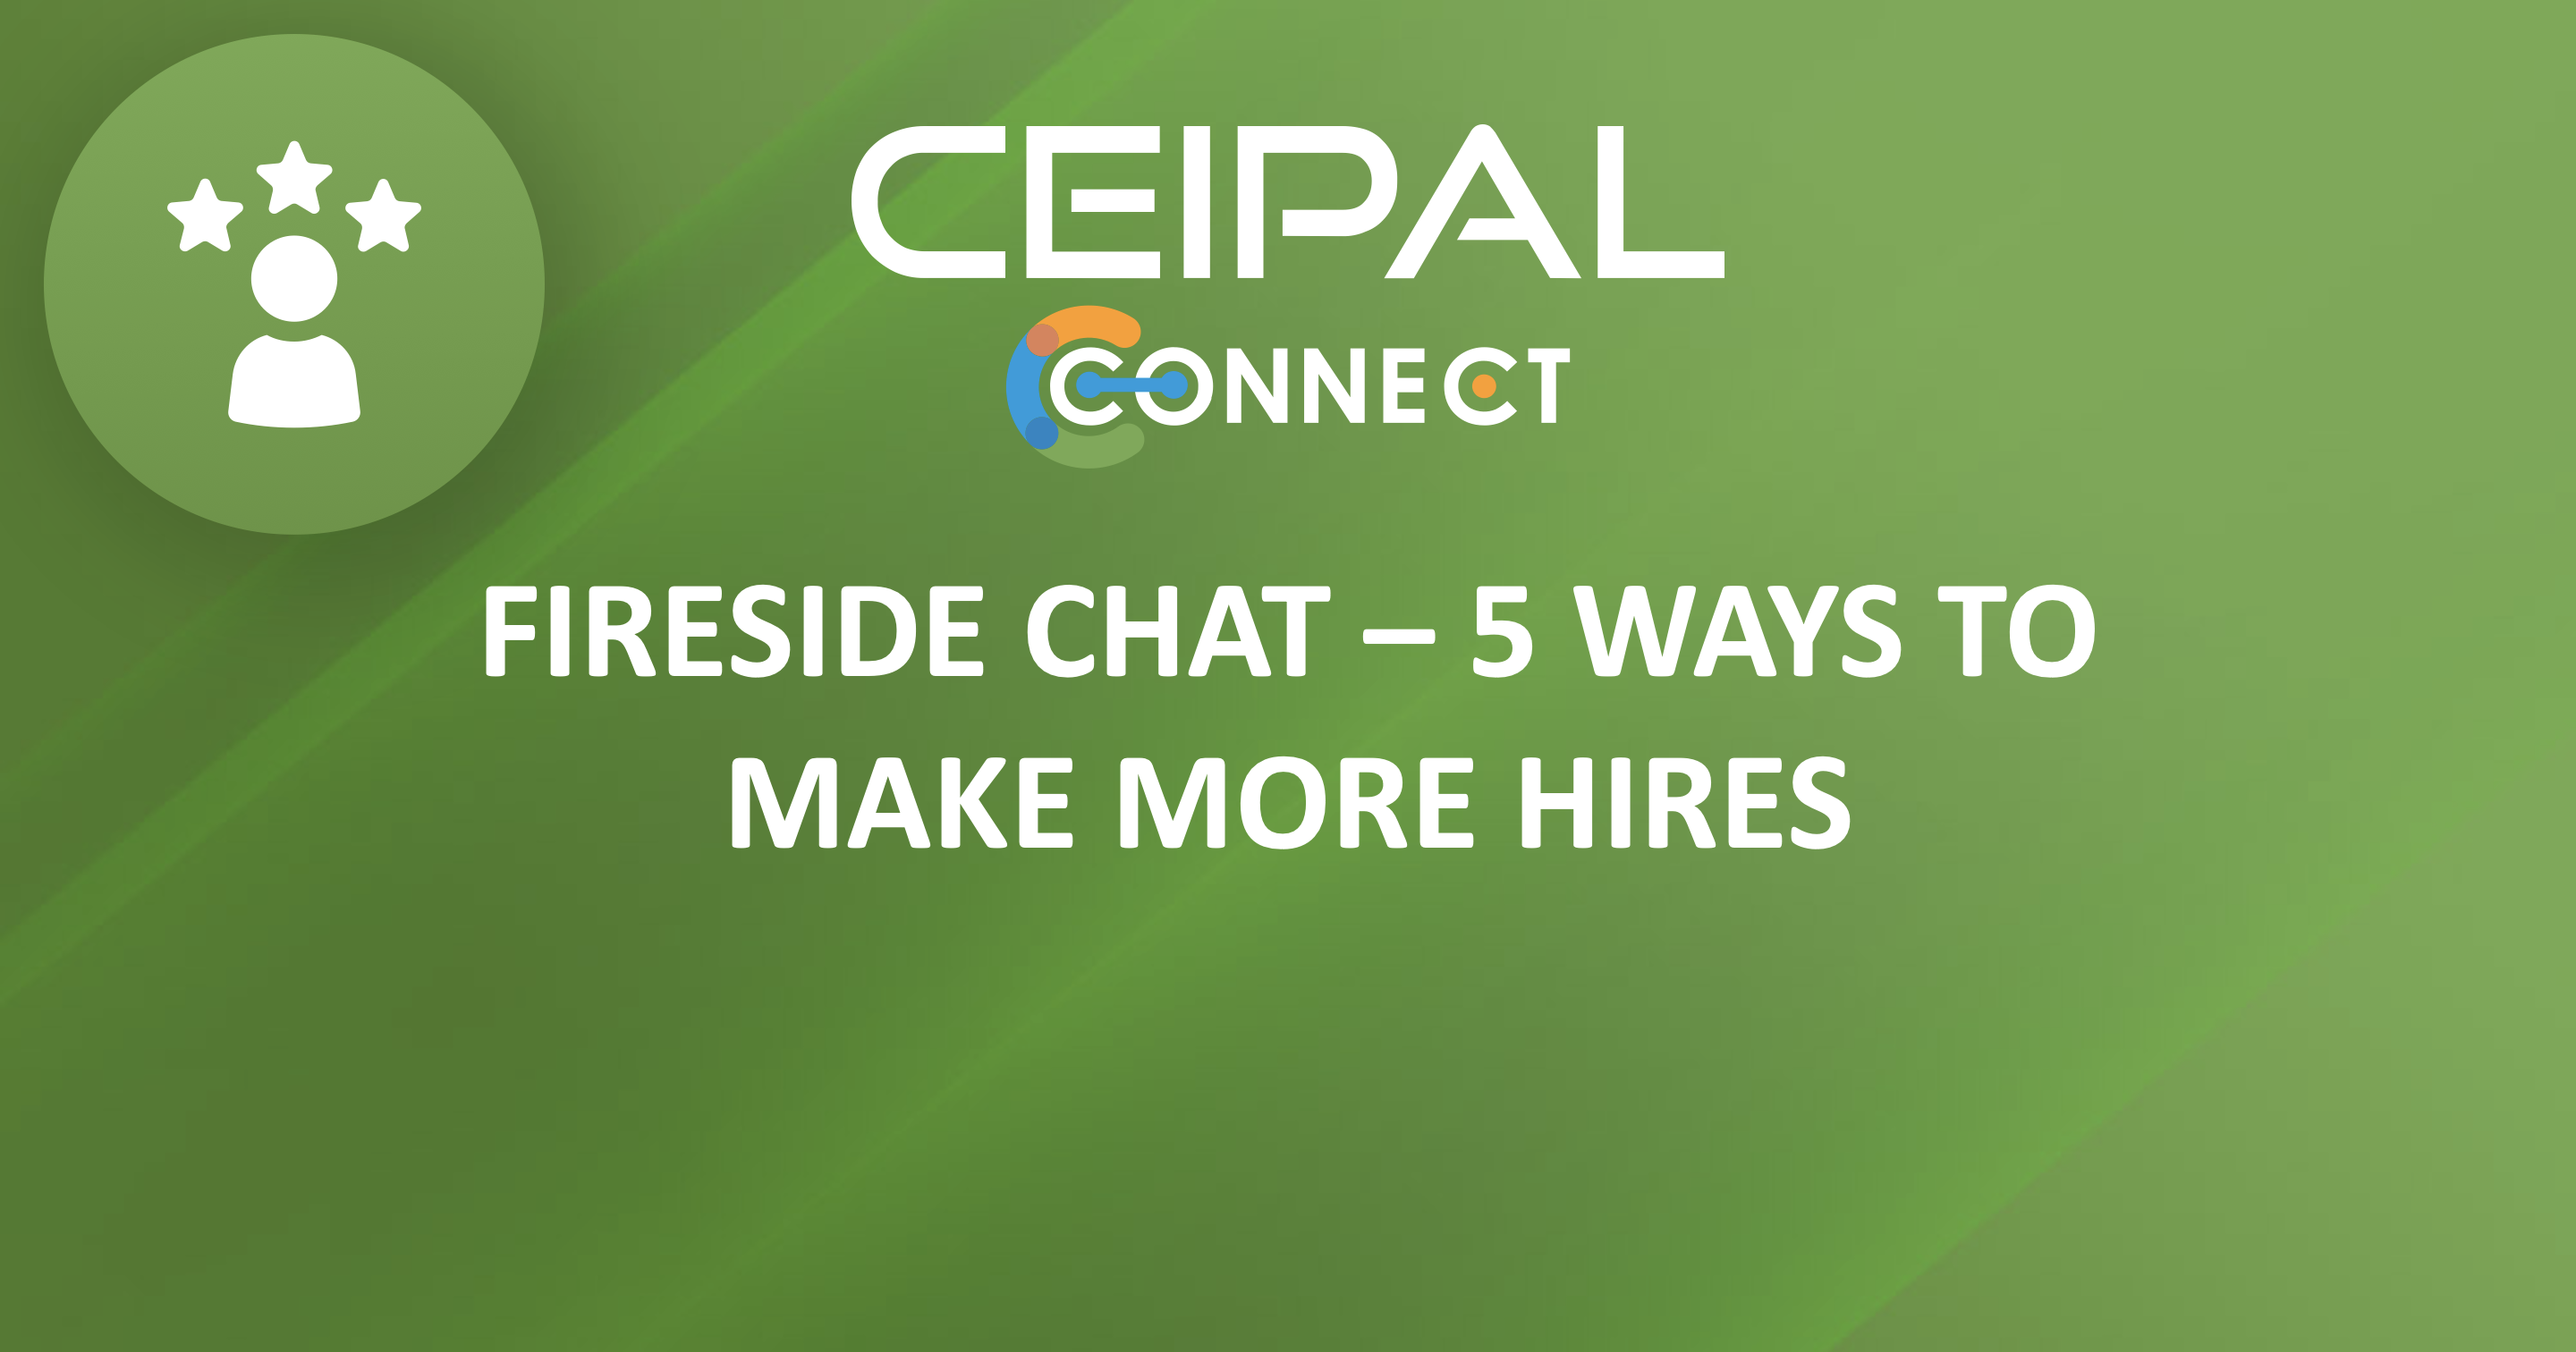 Fireside Chat—5 Ways To Make More Hires